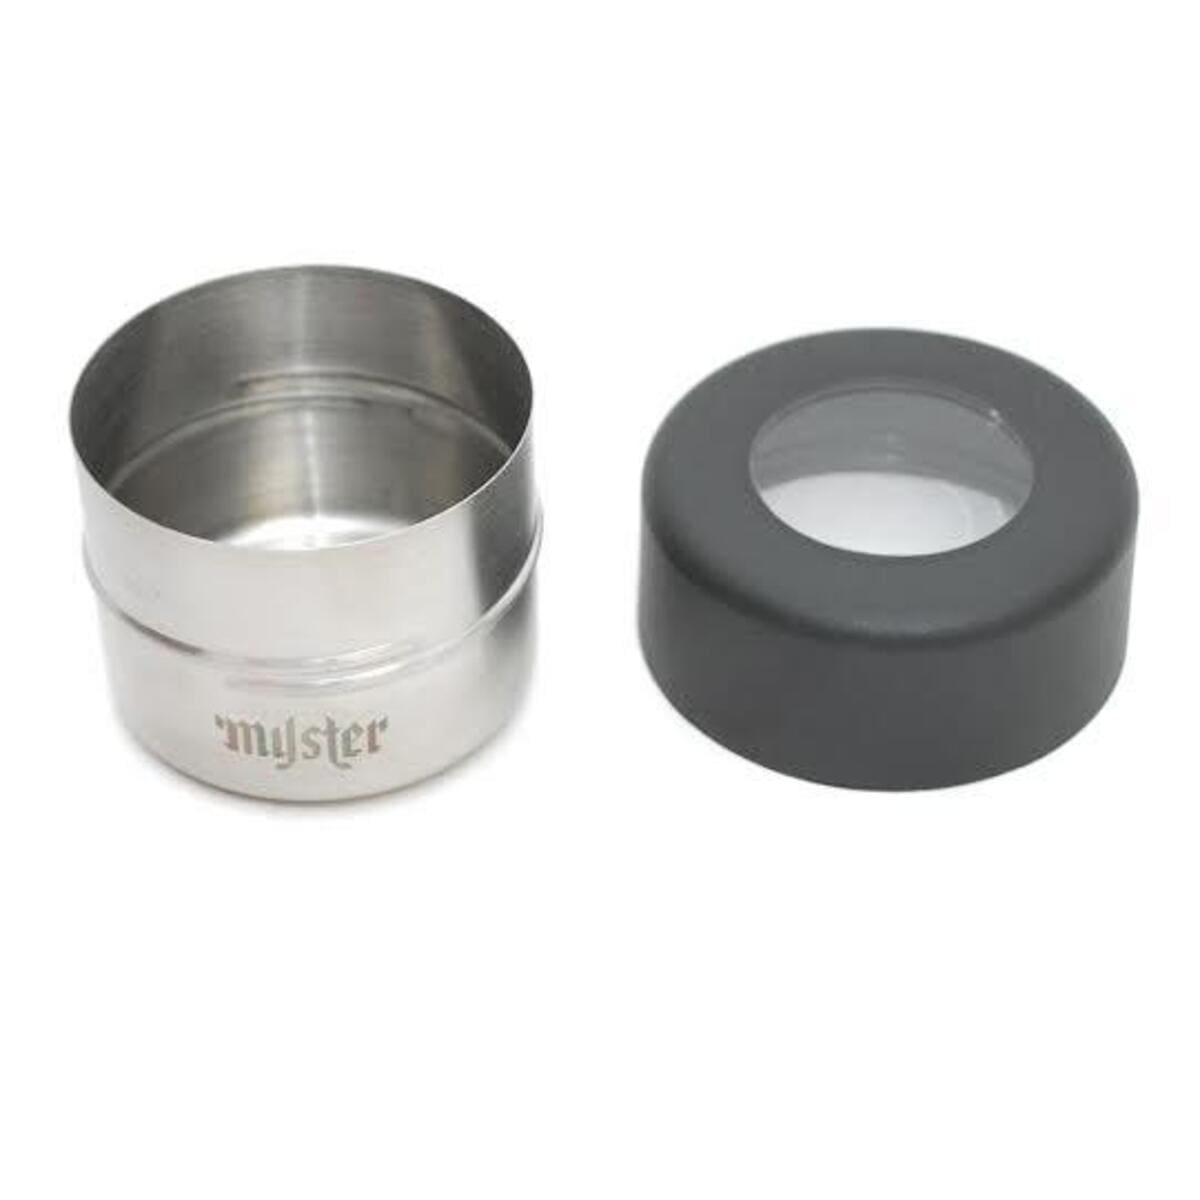 Myster Accessory Myster Magnetic Storage Pods